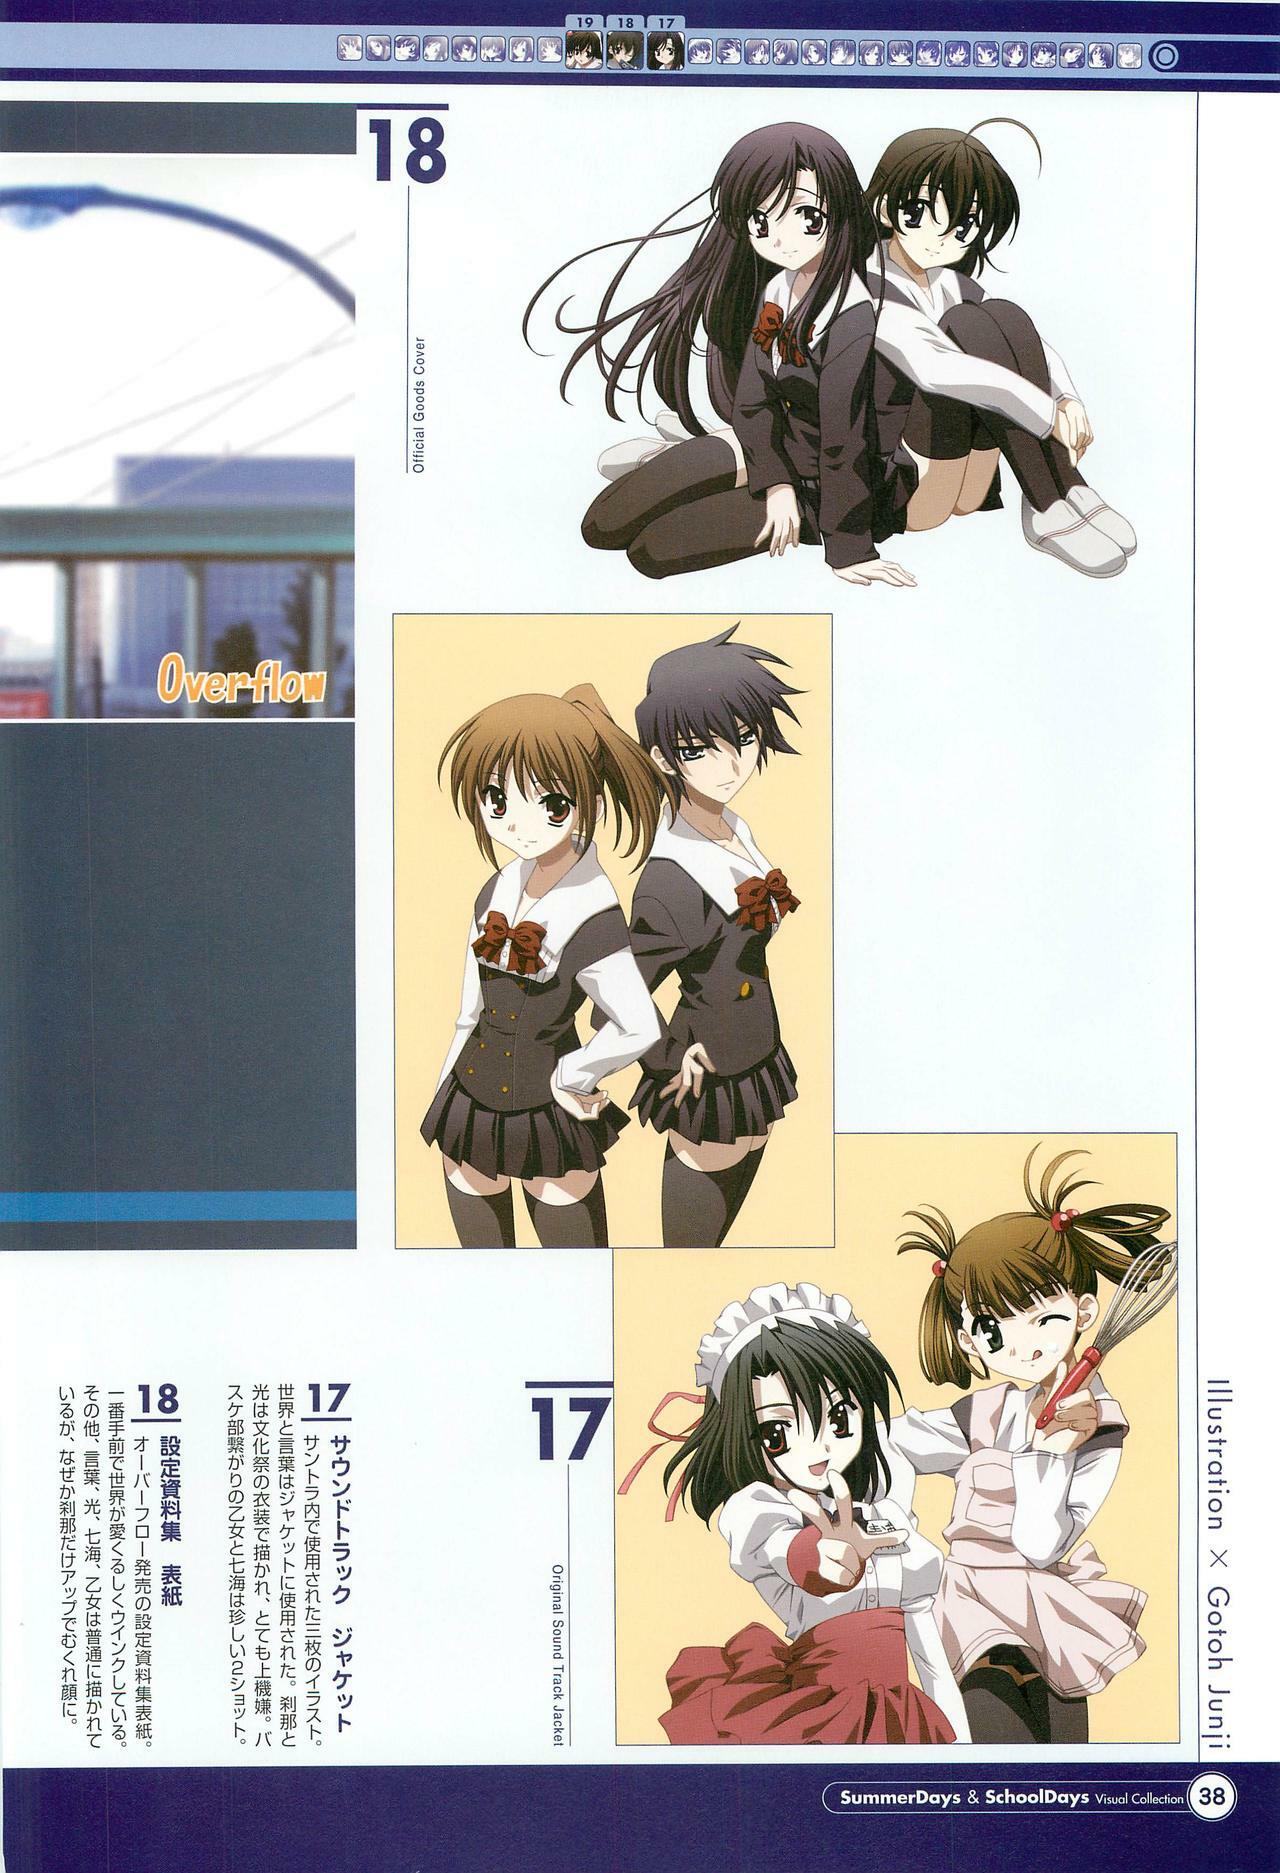 SummerDays & School Days Visual Collection page 40 full